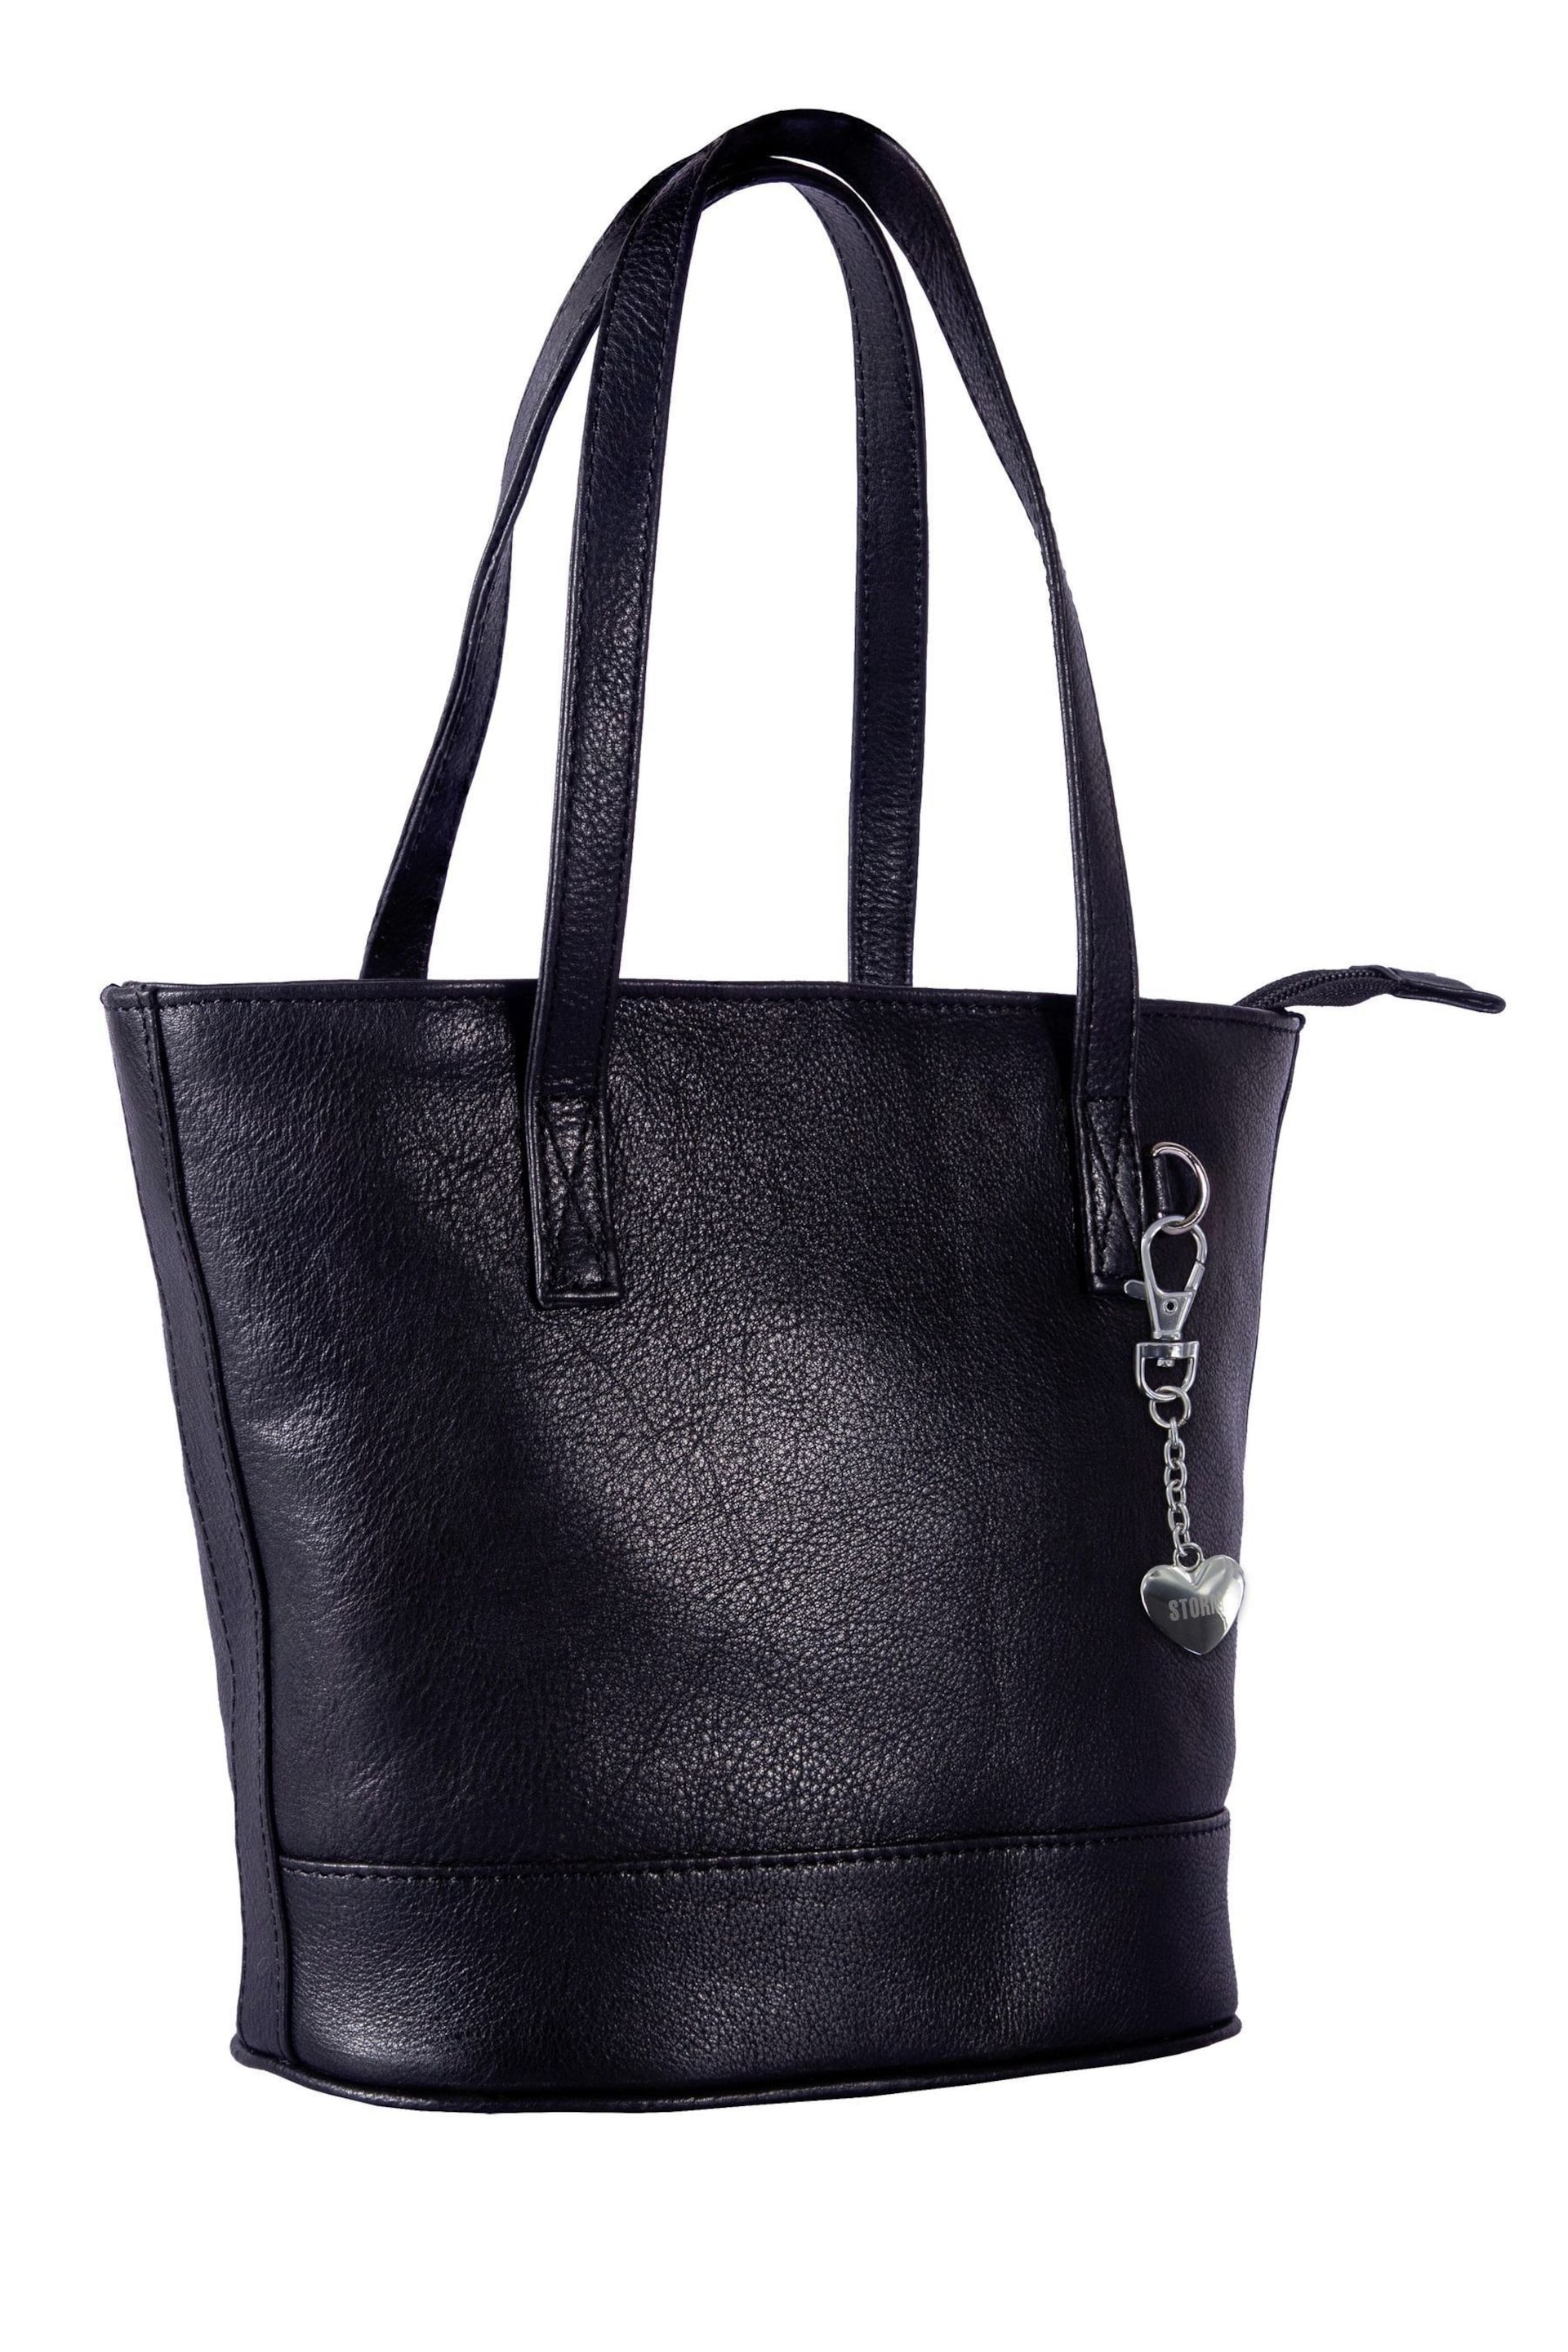 Storm Elettra Leather Bucket Grab Bag - Image 3 of 5